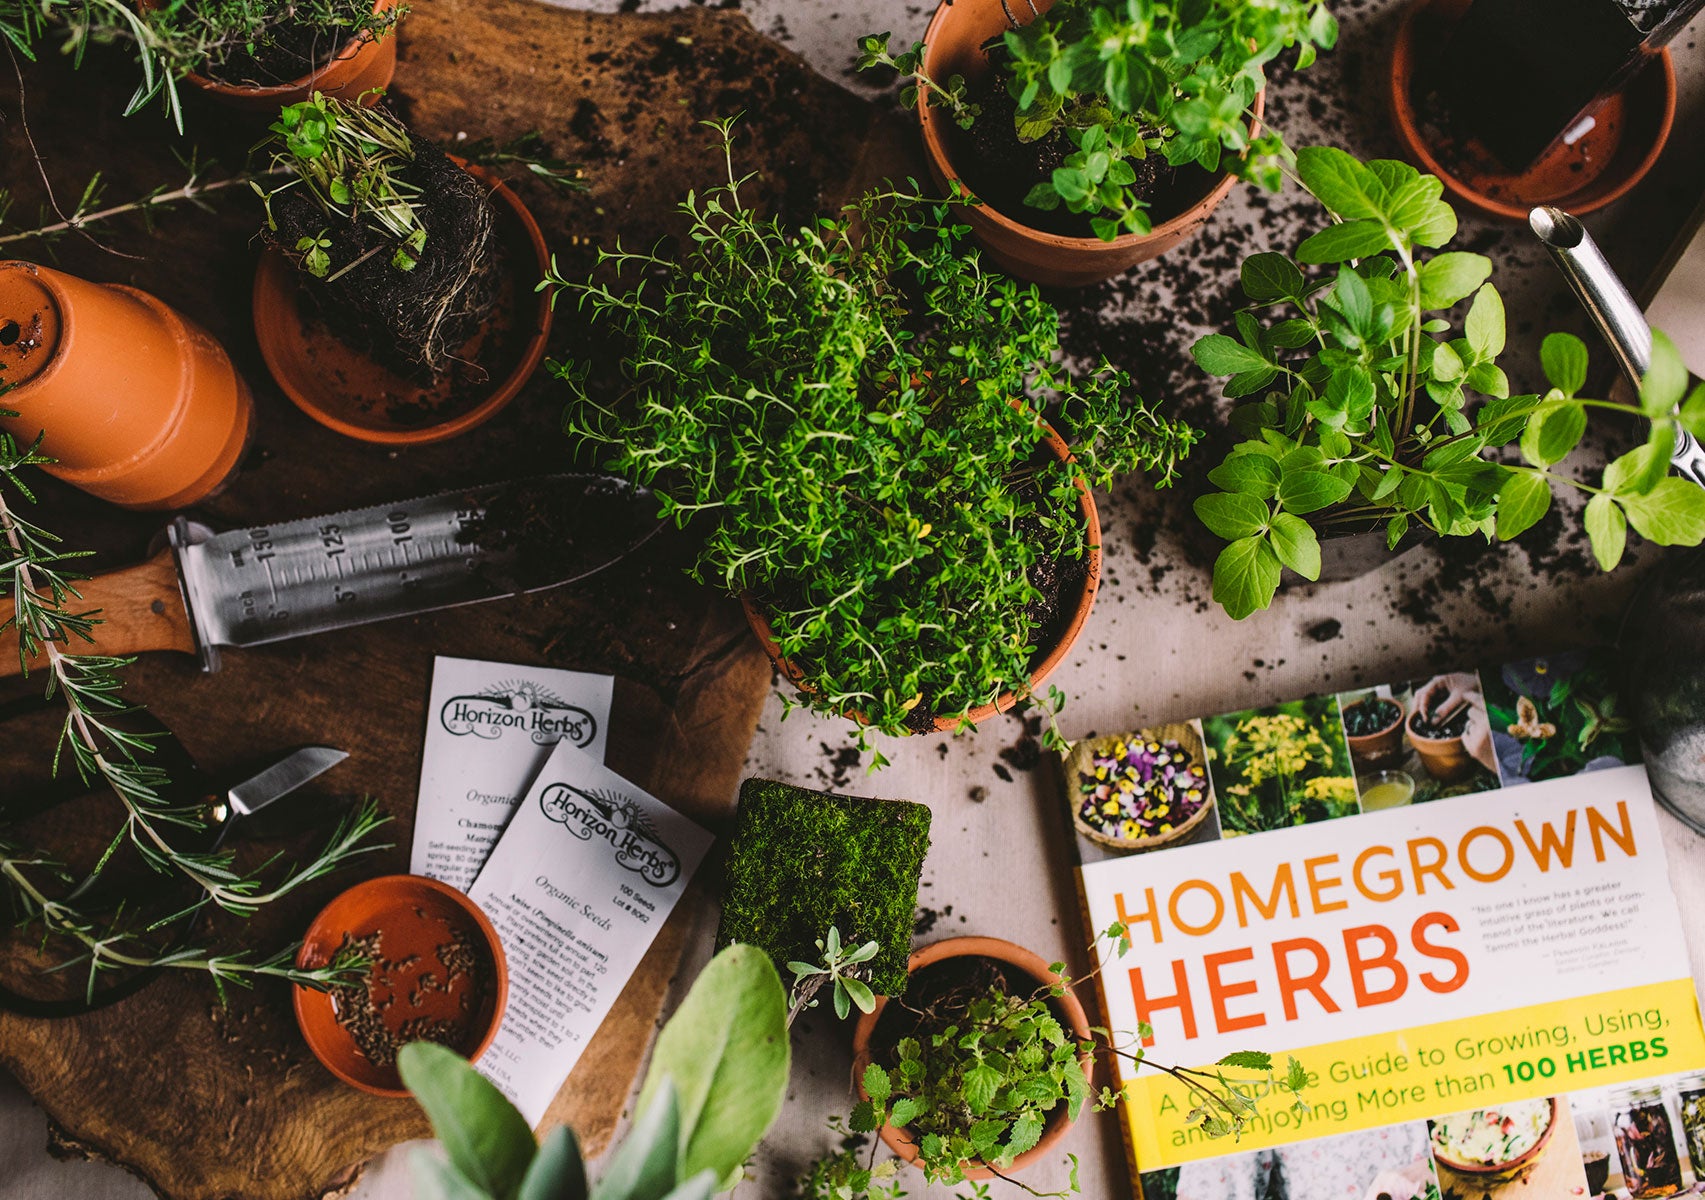 Plants and herb books on table 